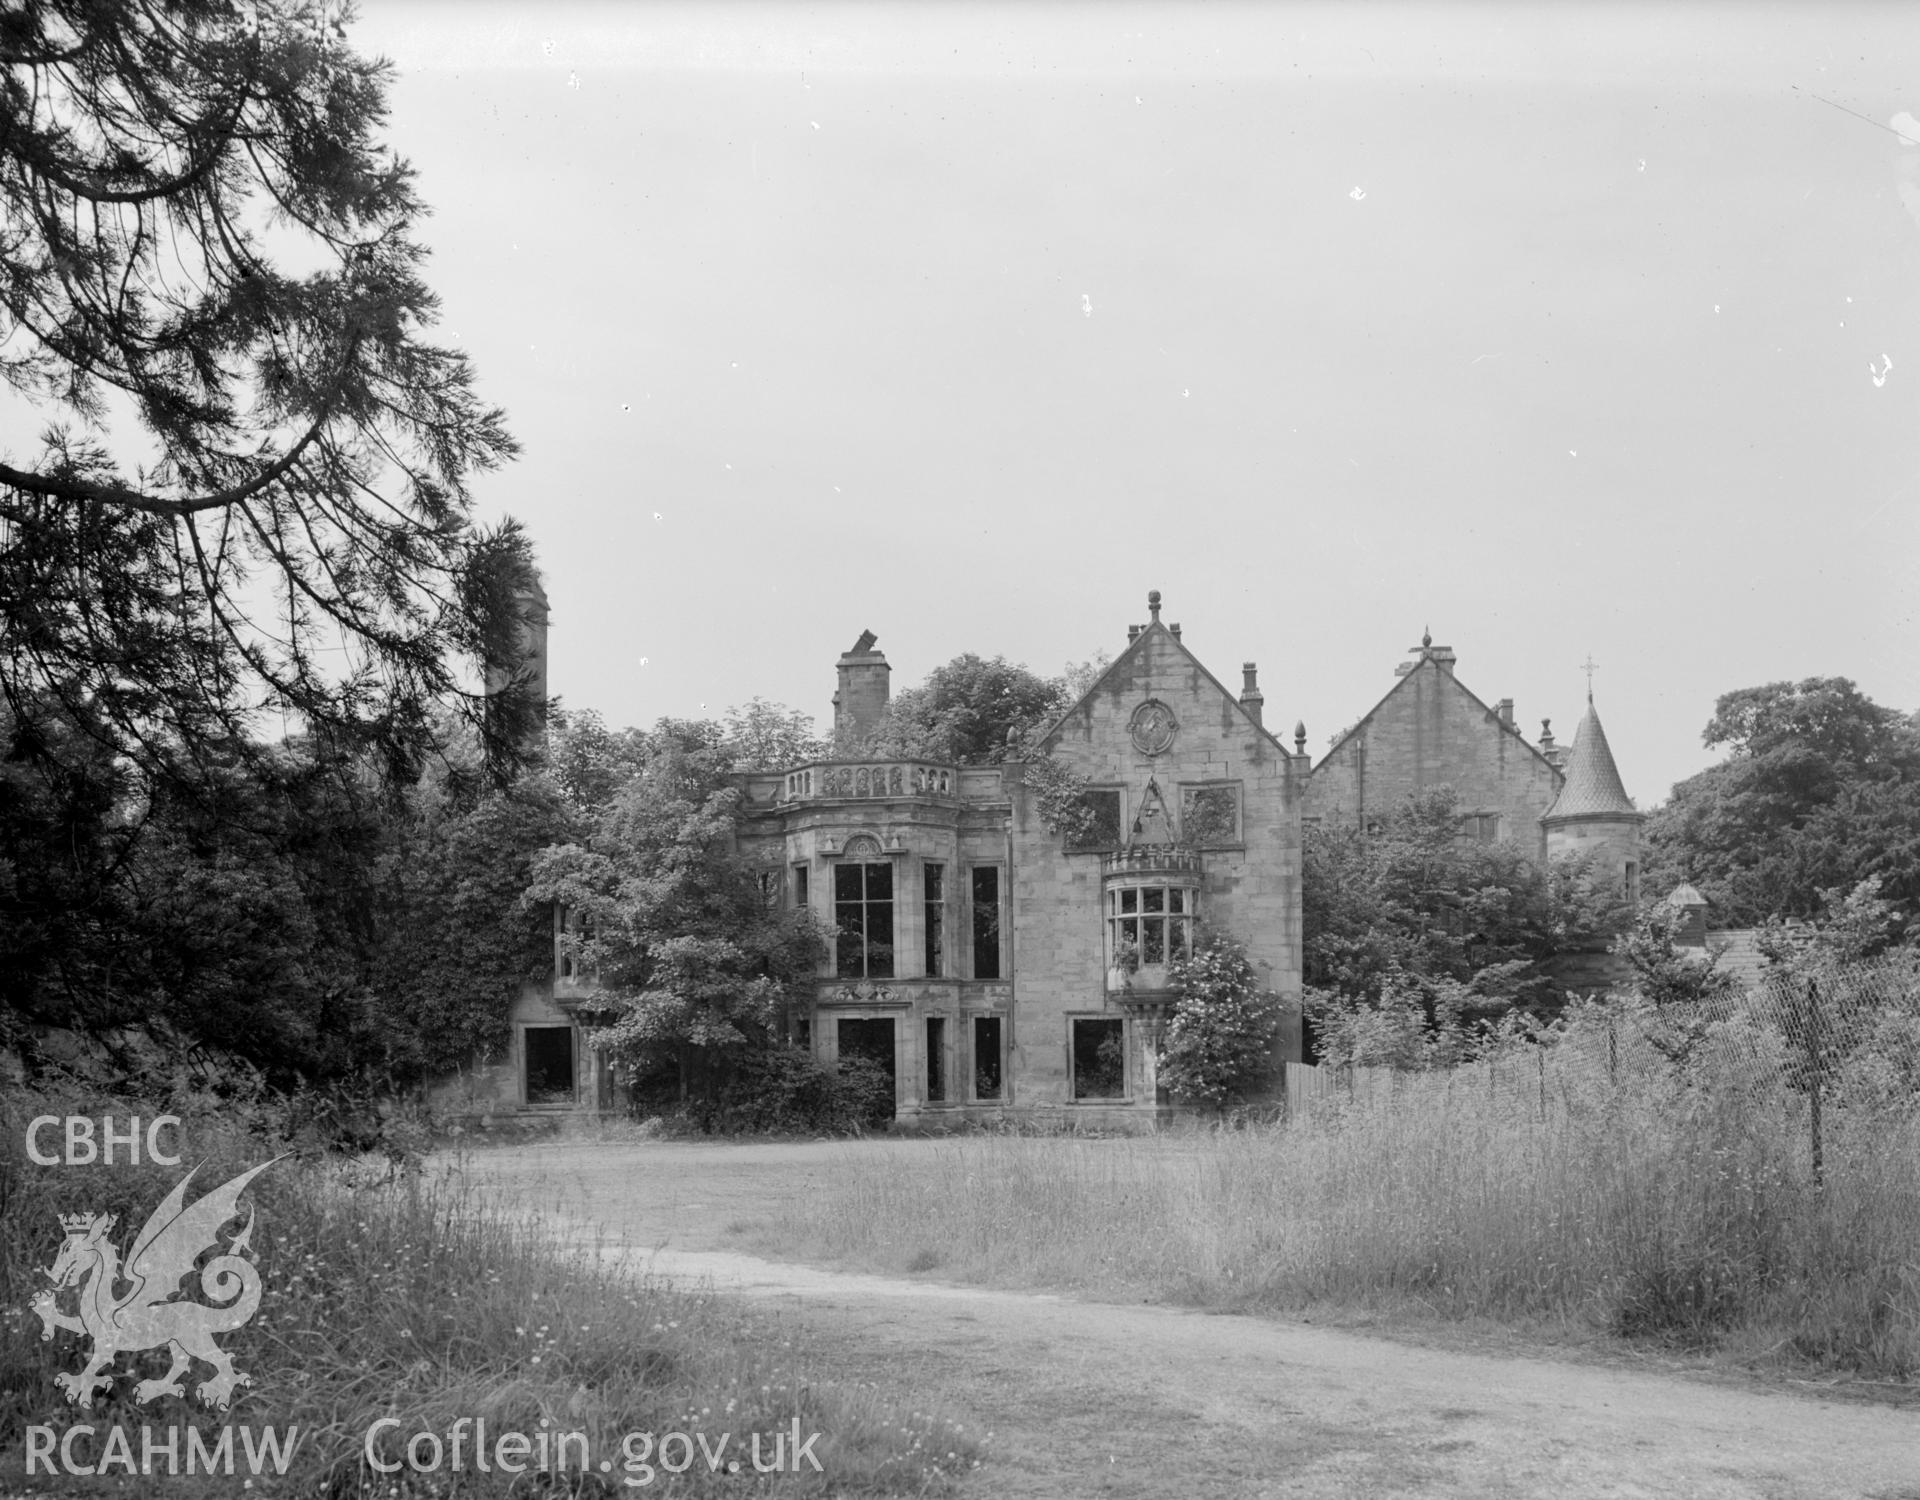 A view of a dilapidated country house. Trees growing through the structure.